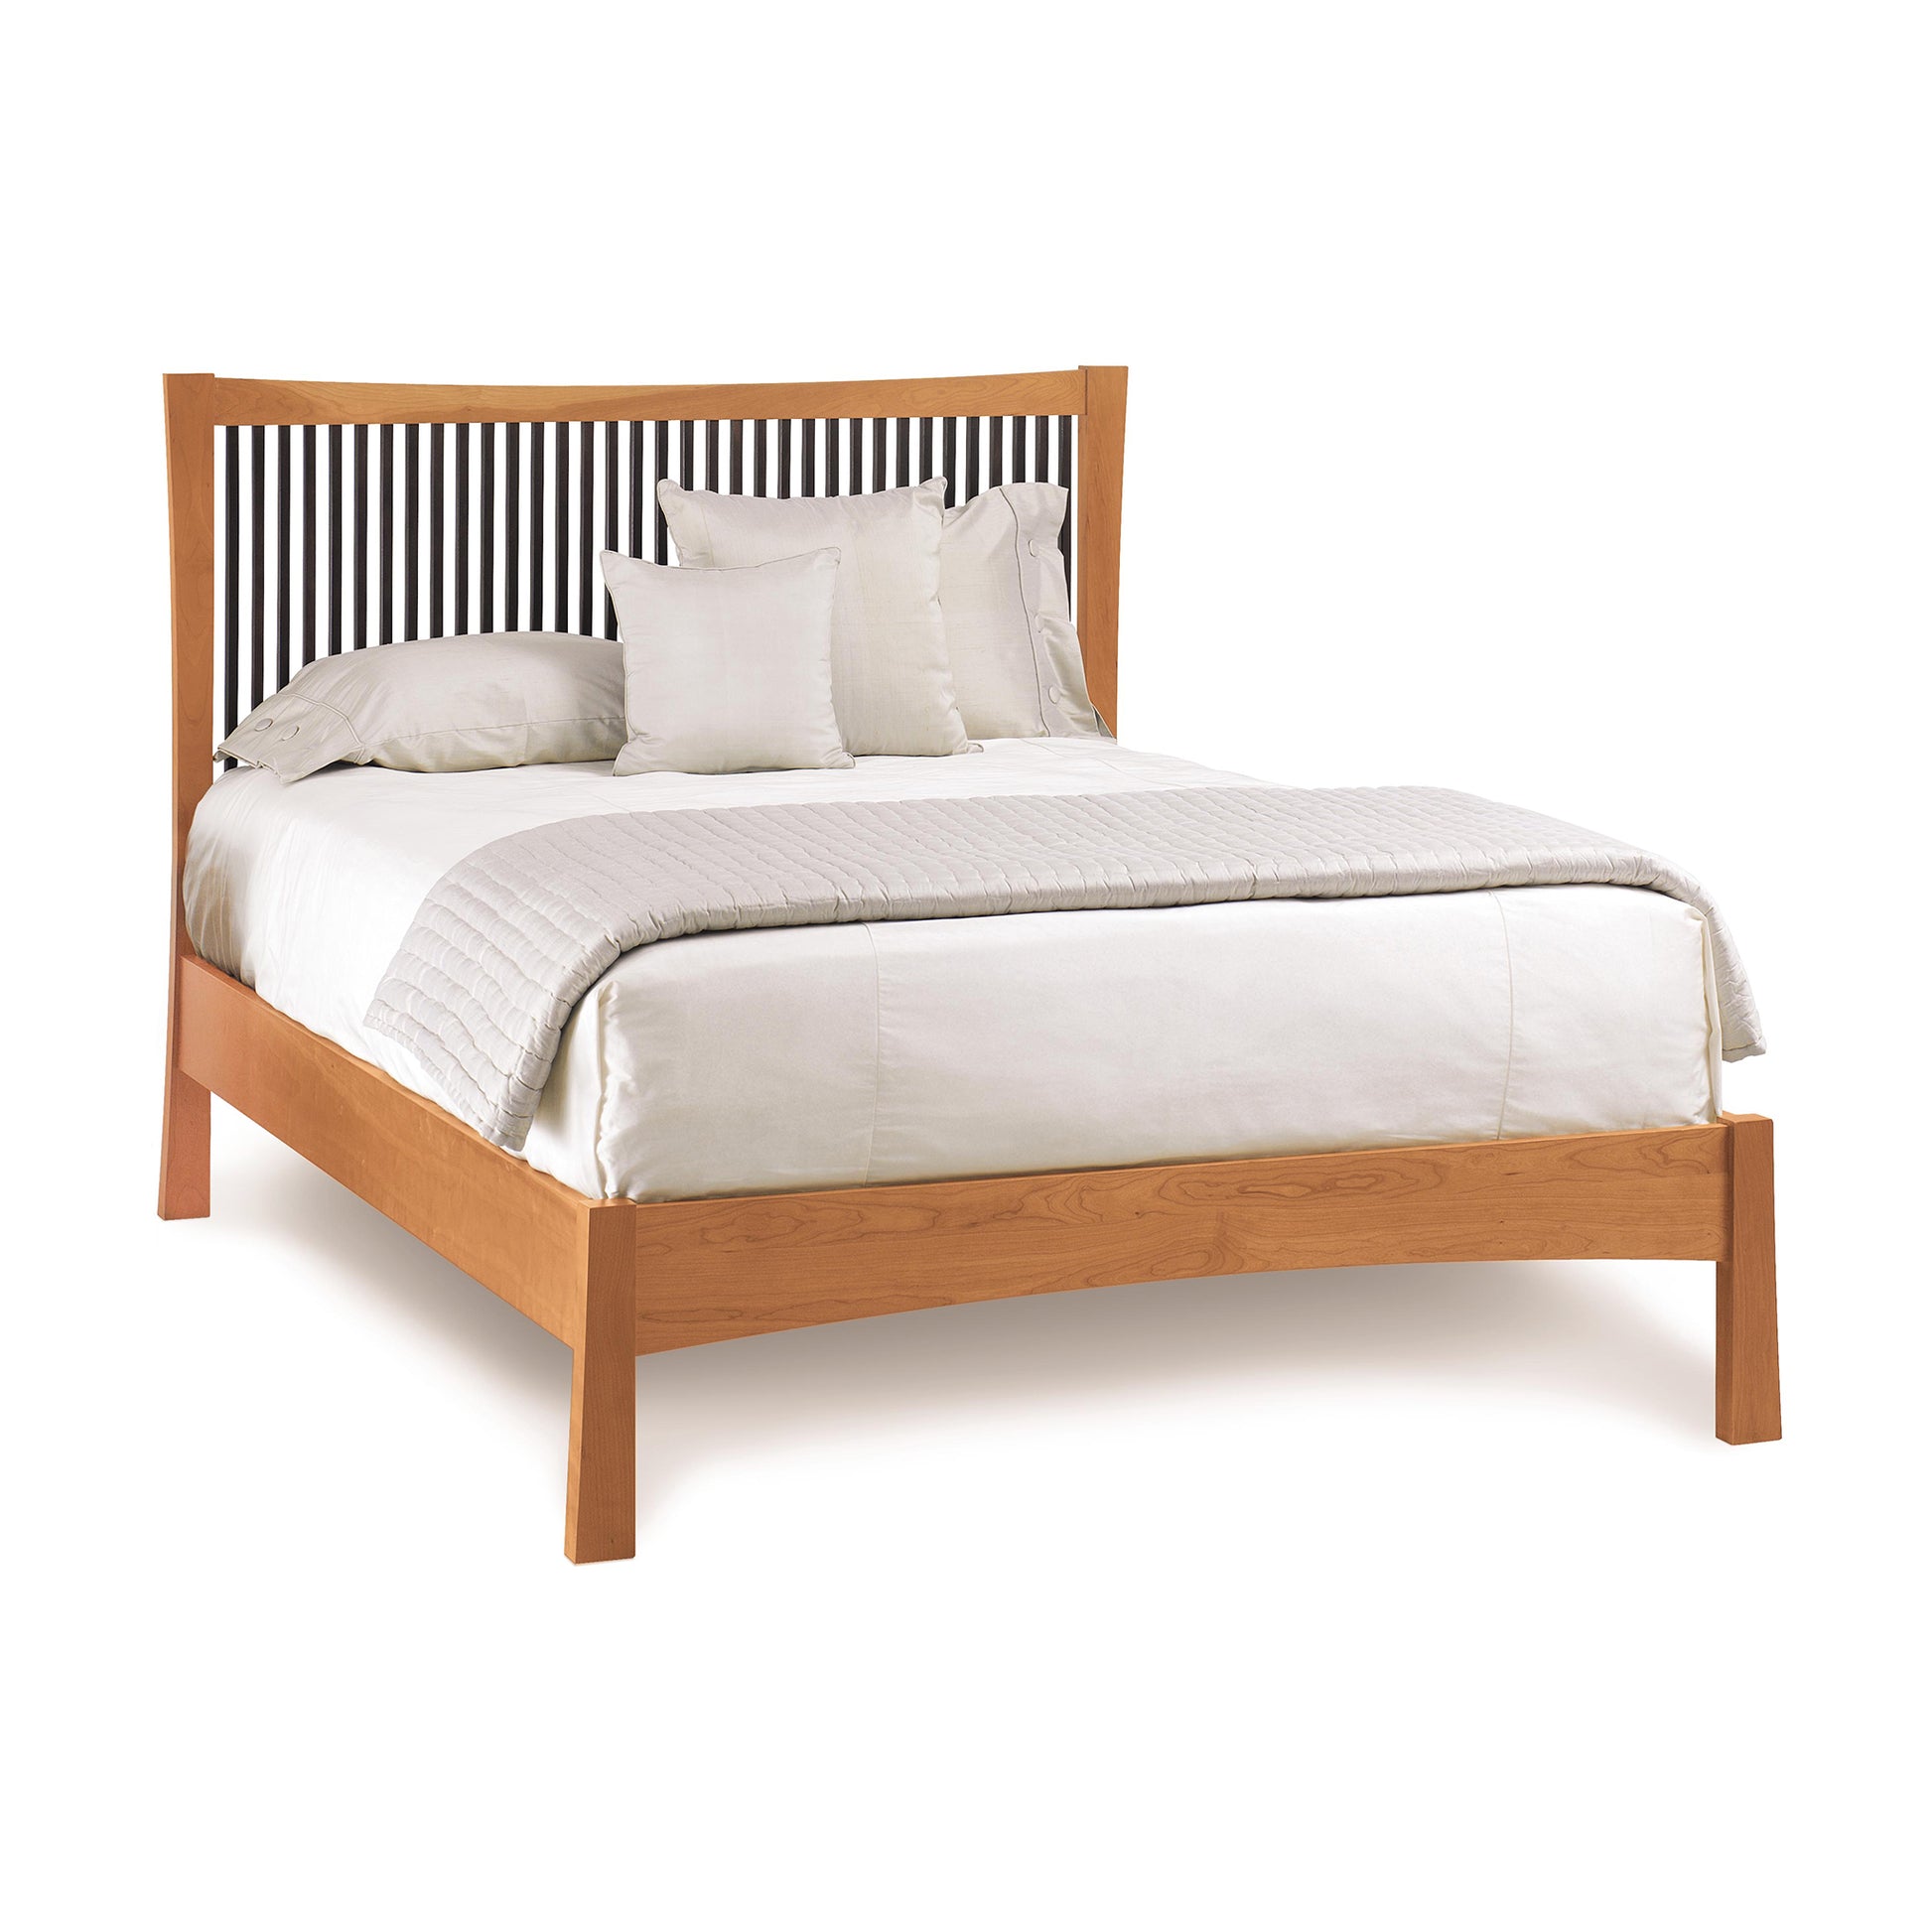 Berkeley Cherry Platform Bed frame with a slatted headboard, dressed with white bedding and pillows, isolated on a white background, reflecting the American Craftsman style.